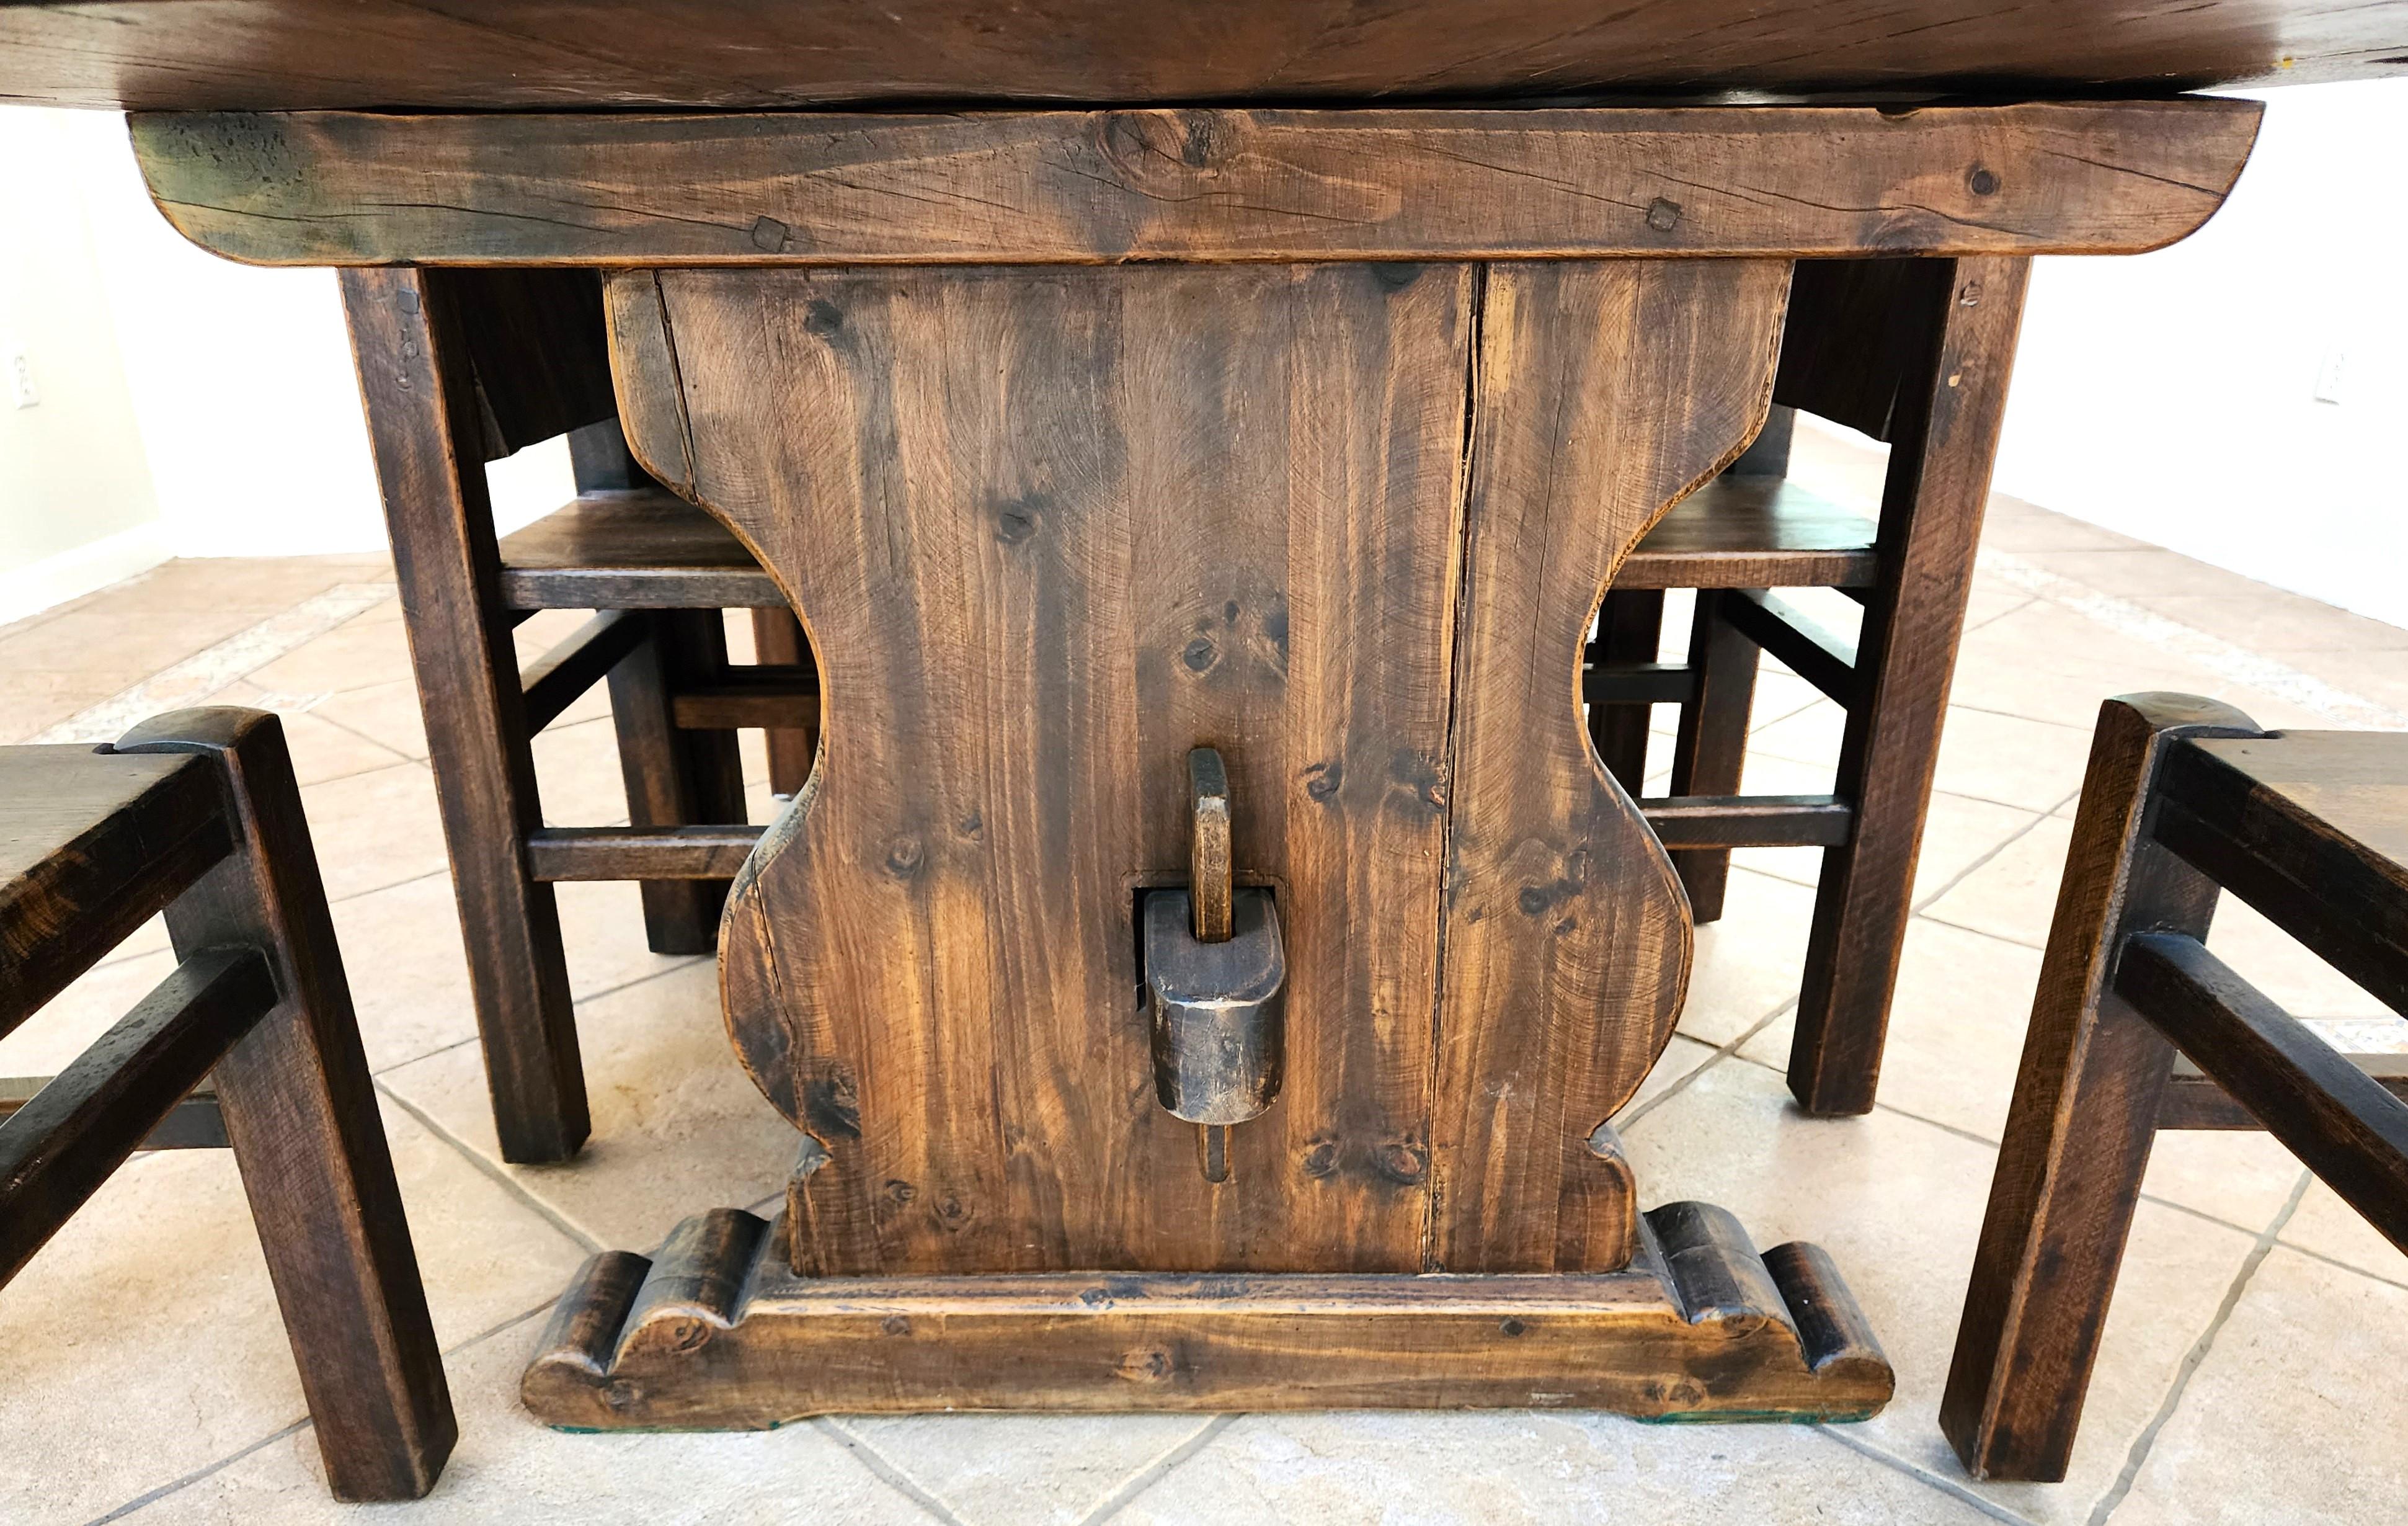 Rustic 1800s Oak Refectory Dining Table with 16 Matching Chairs 16 foot For Sale